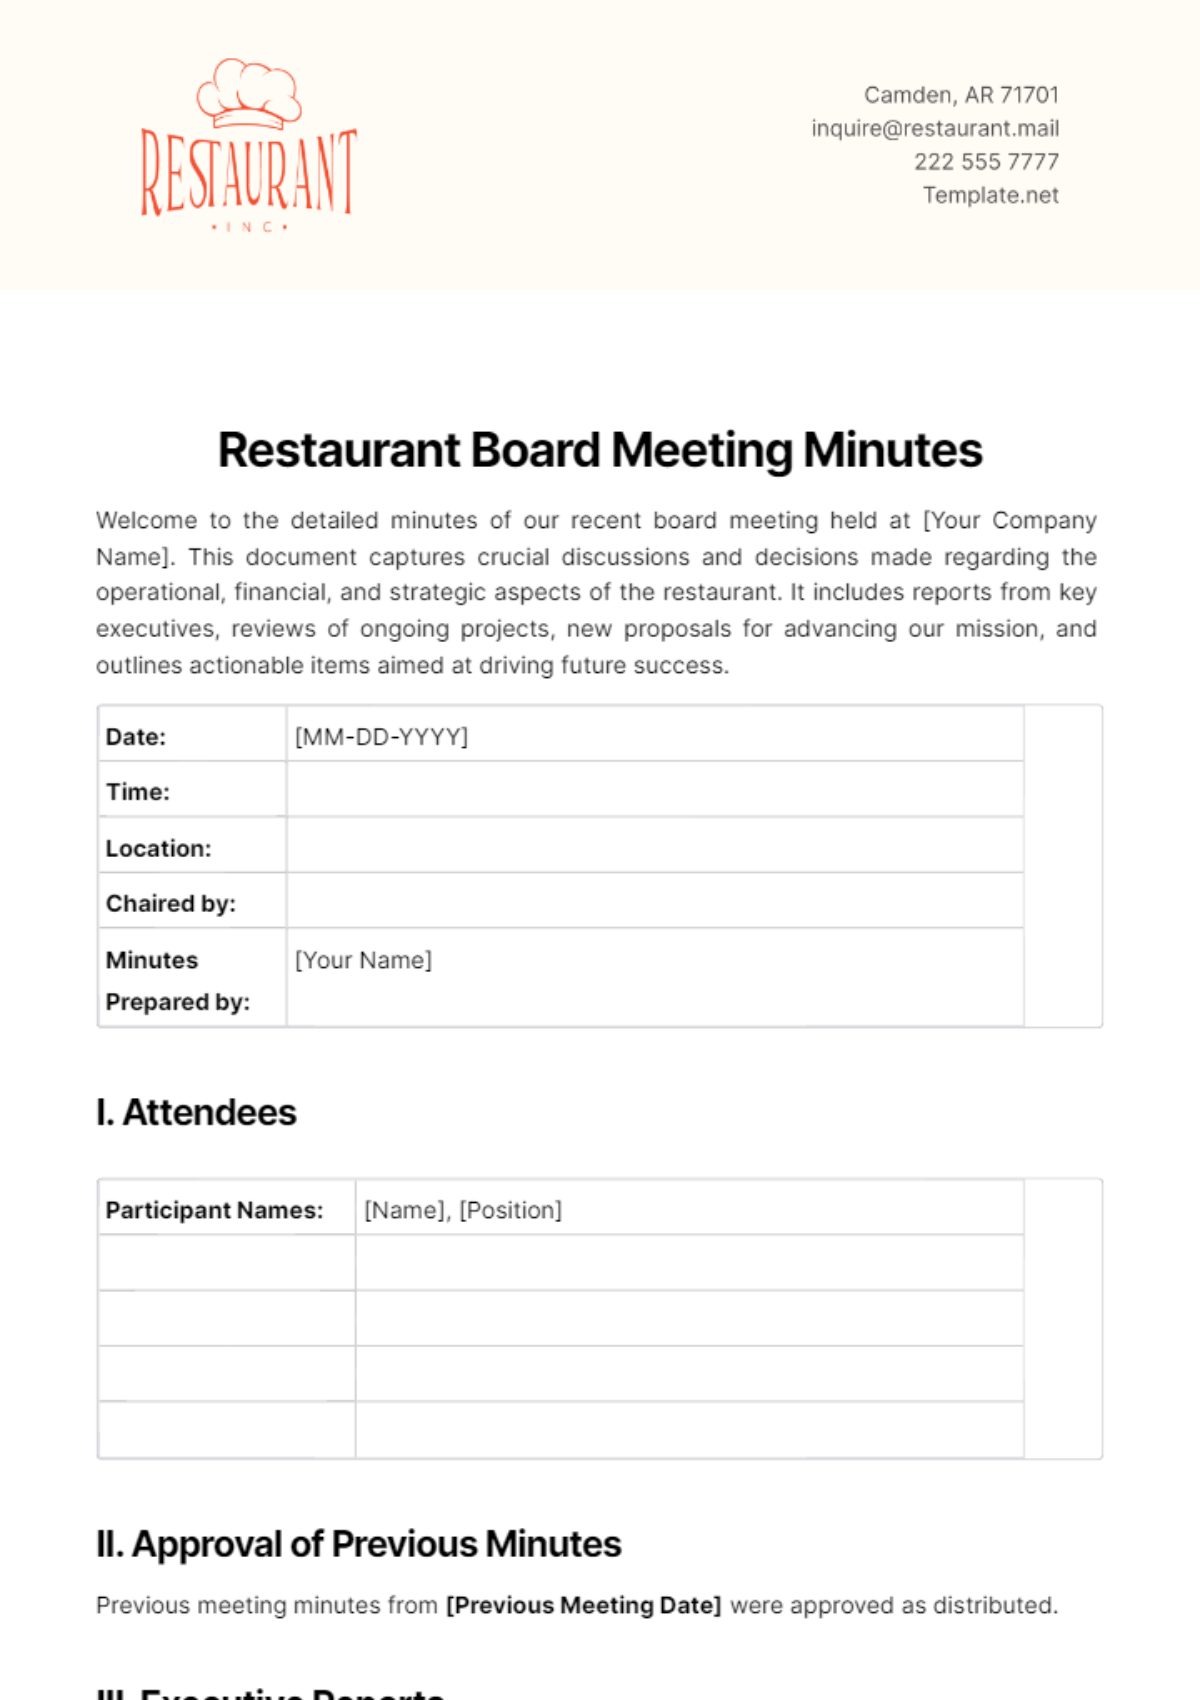 Restaurant Board Meeting Minutes Template